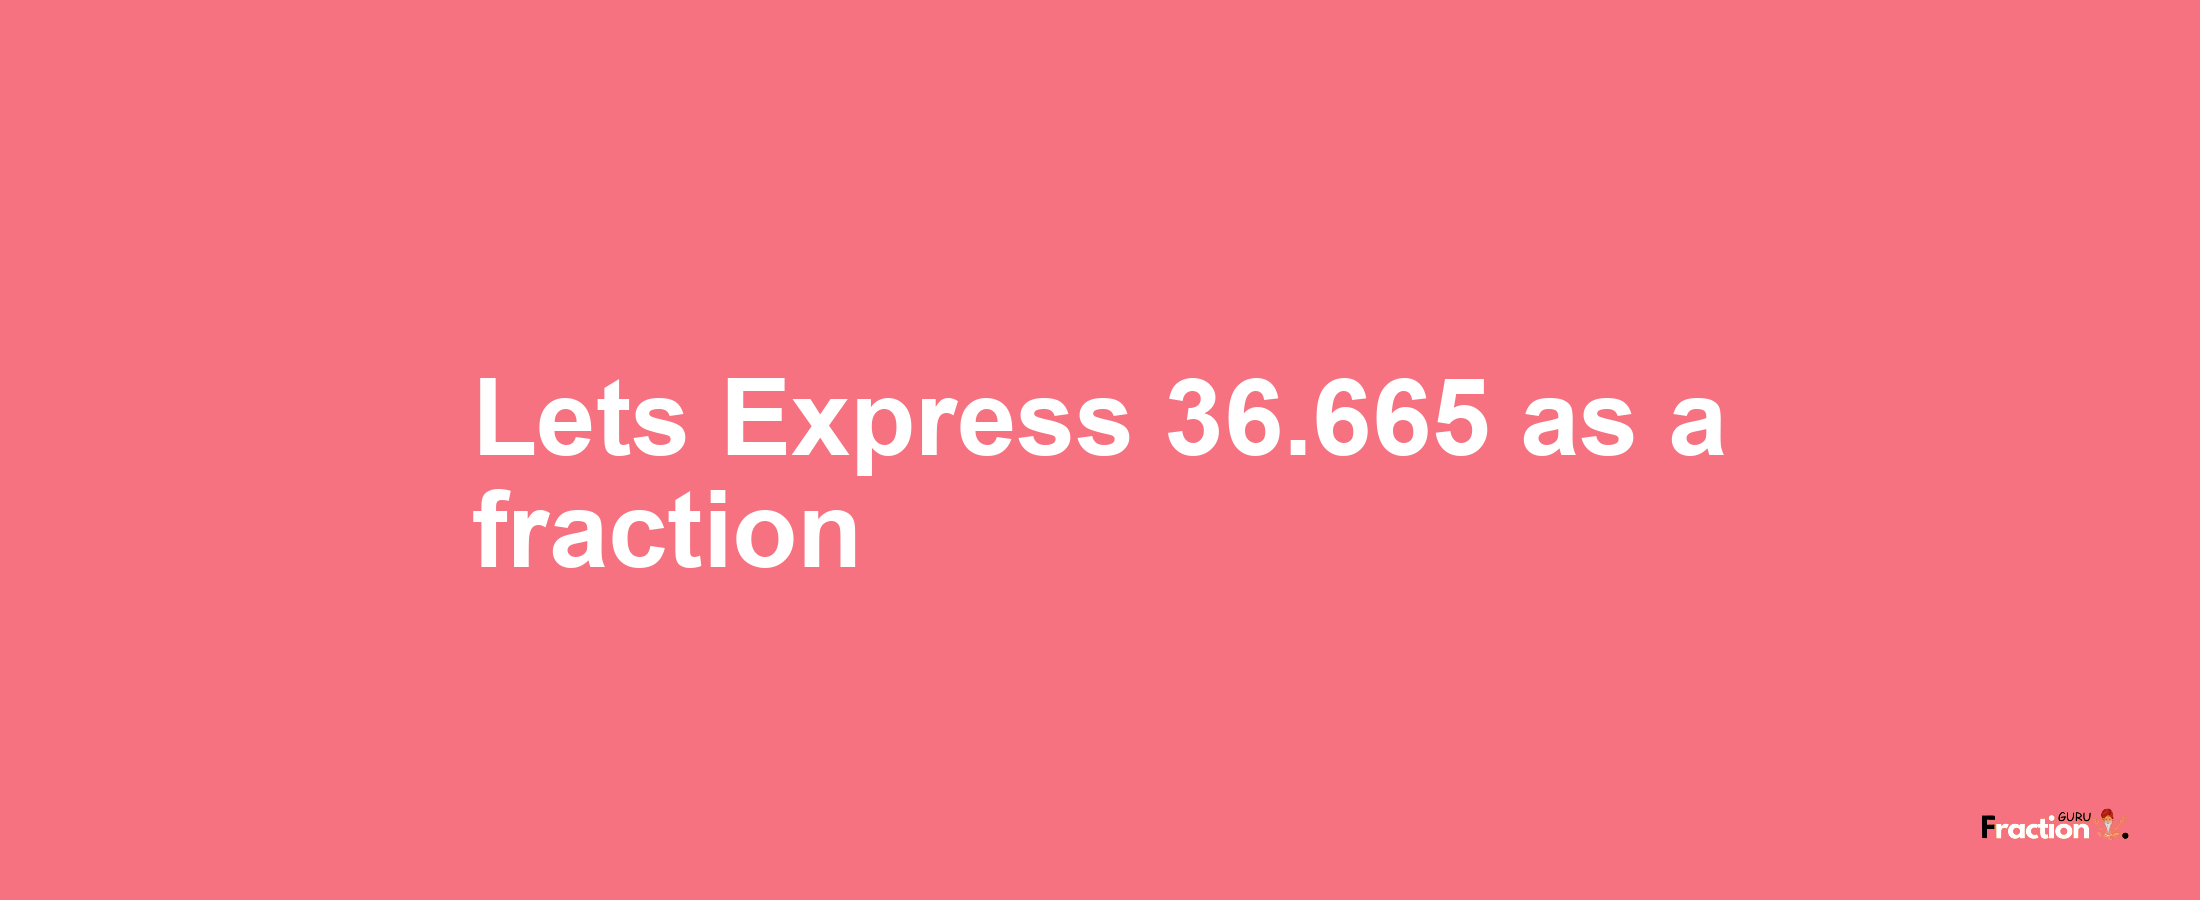 Lets Express 36.665 as afraction